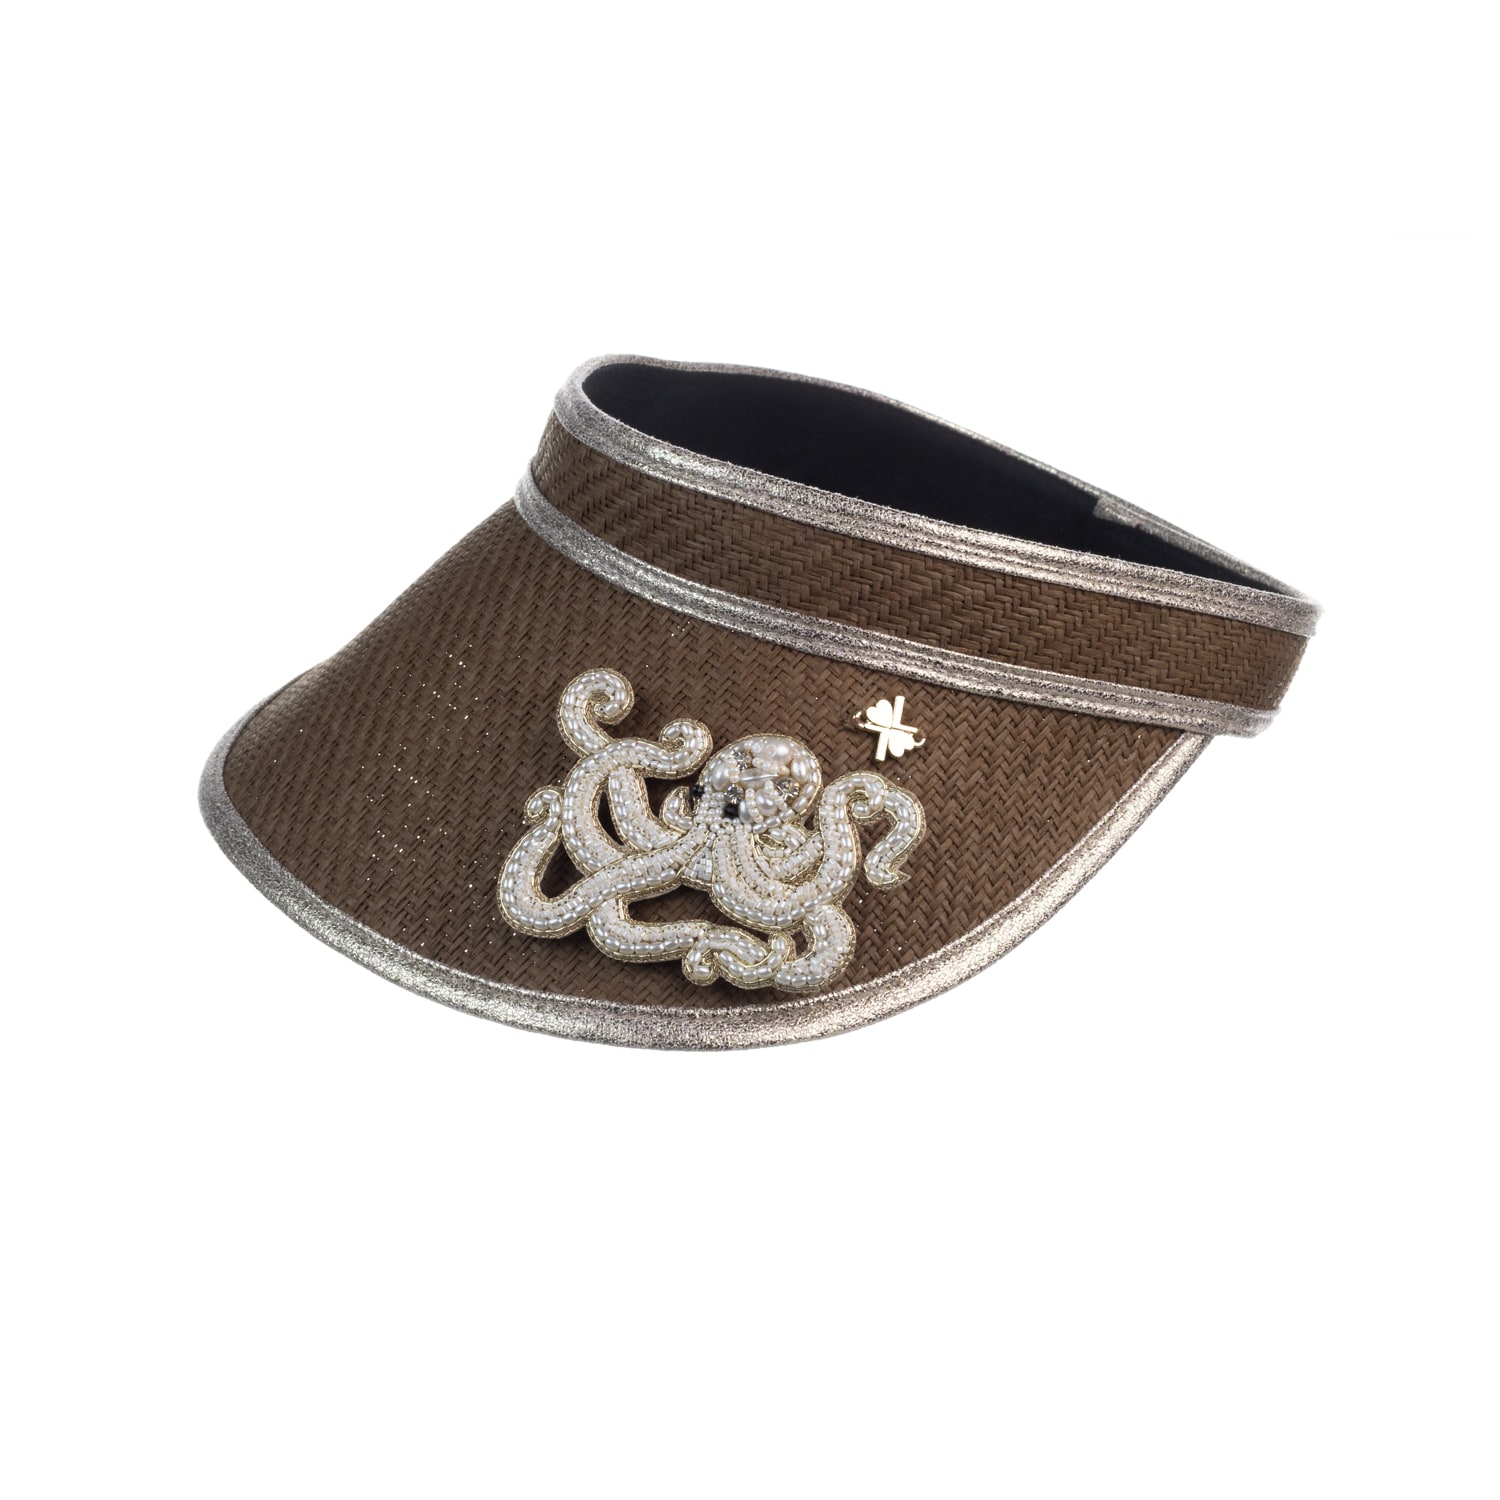 Laines London Women's Brown Straw Woven Visor With Beaded Octopus Brooch - Toffee